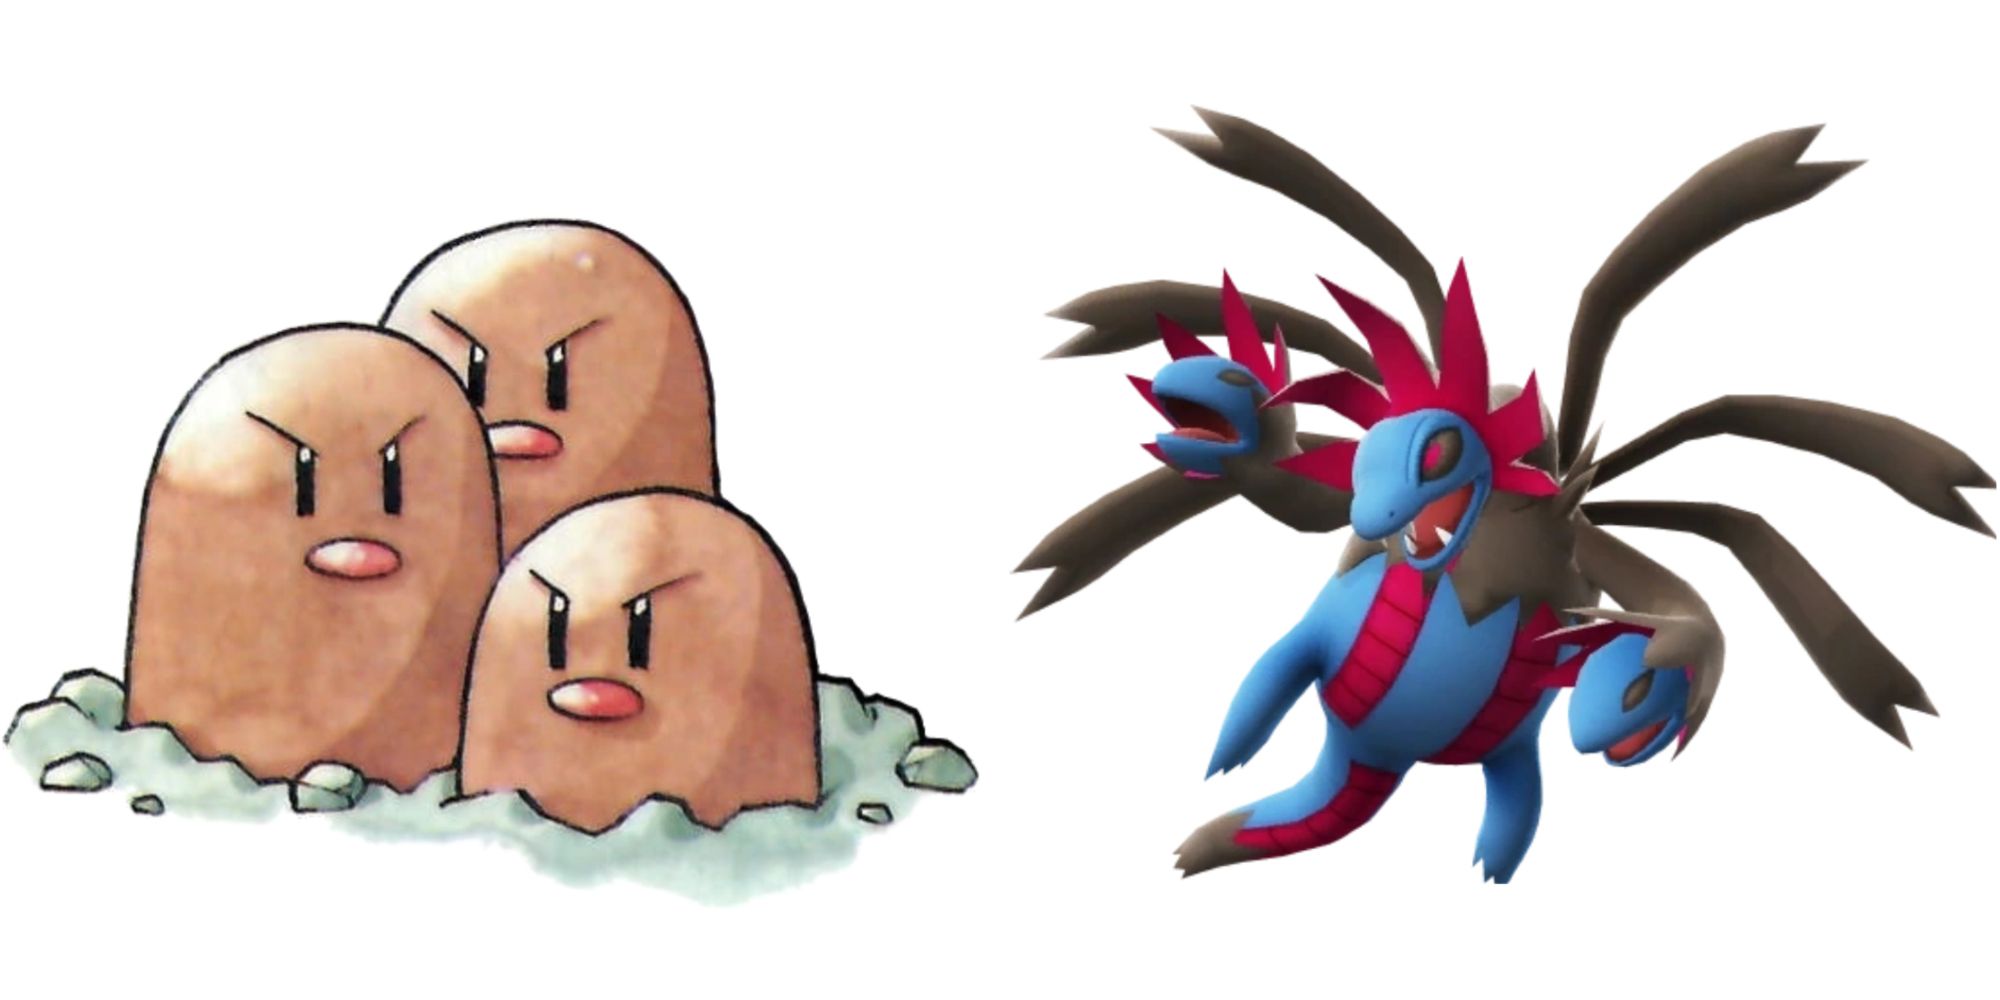 split image of dugtrio and hydreigon from pokemon